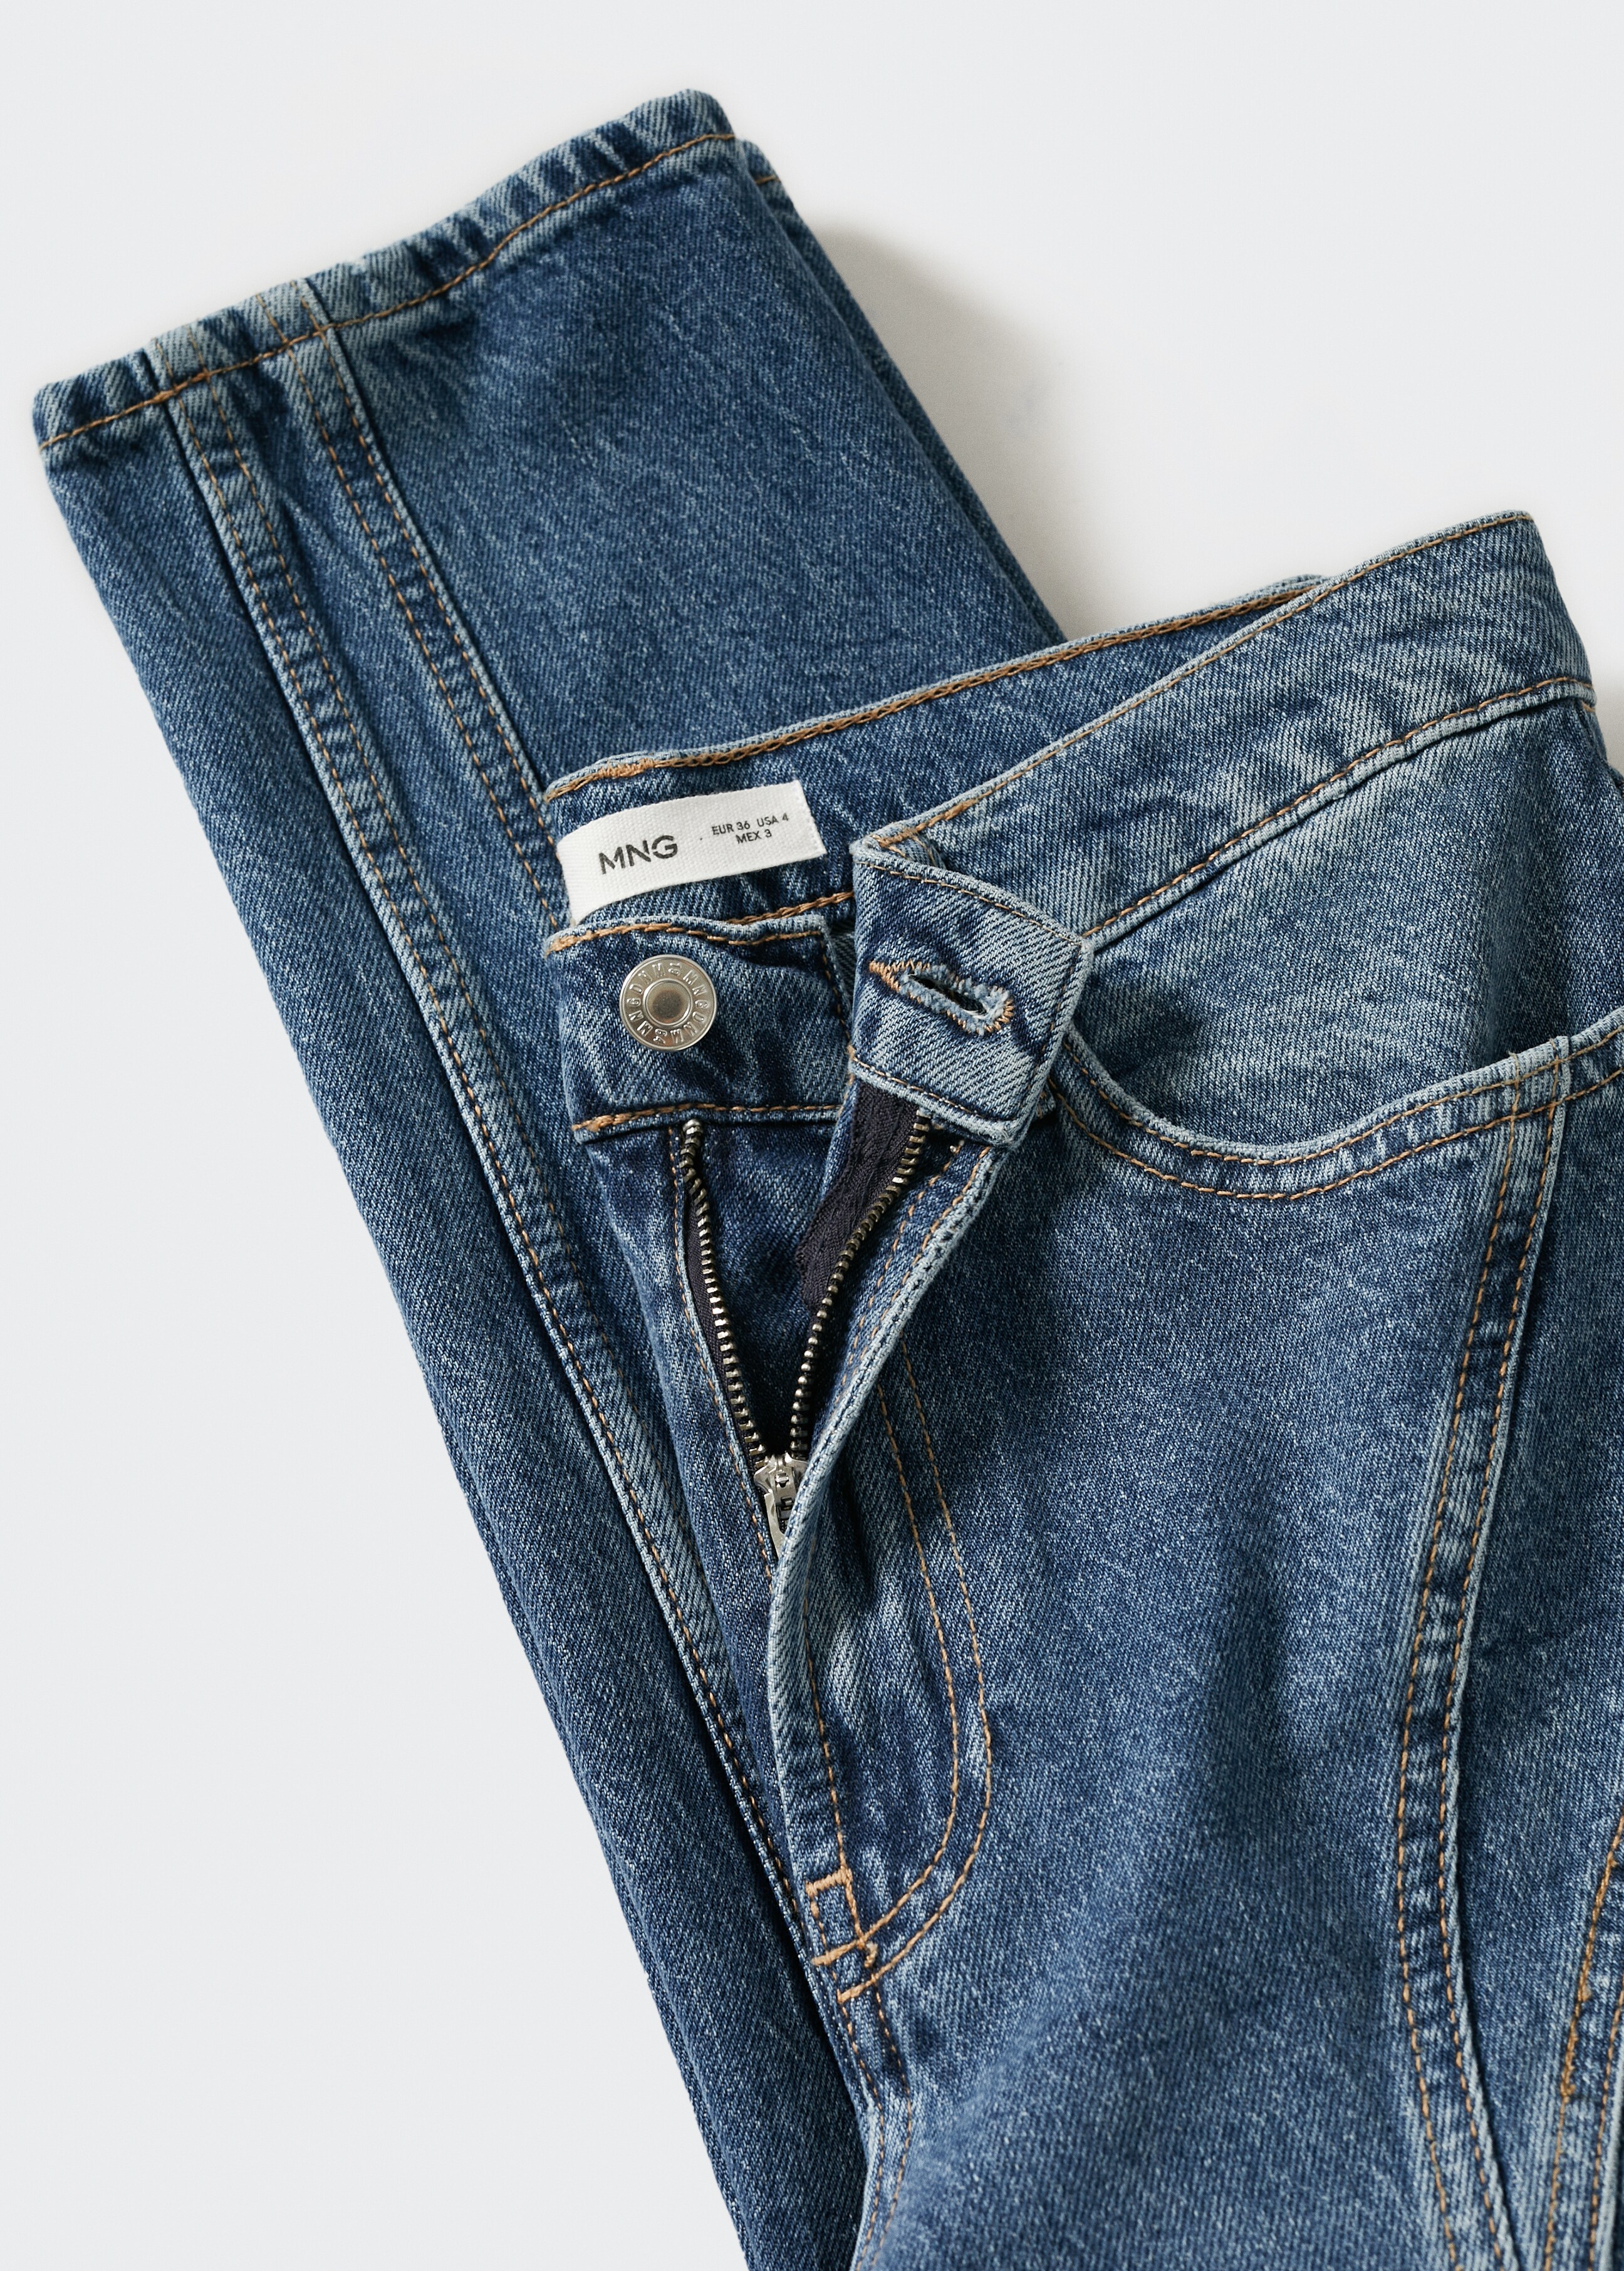 Decorative seam jeans - Details of the article 8